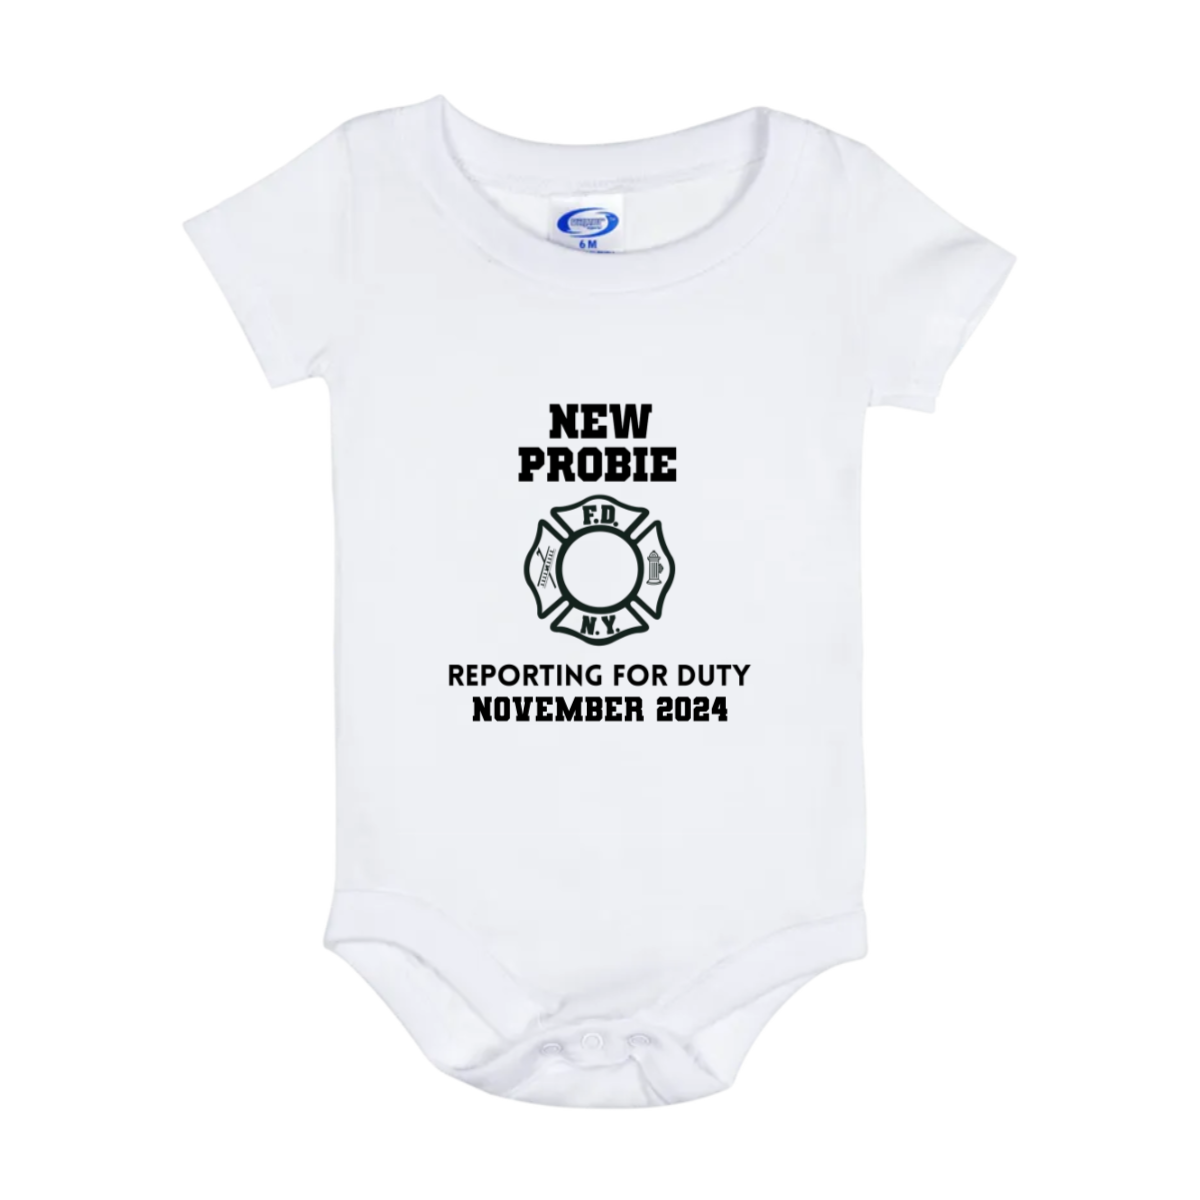 Fresh from the Station Onesie - Customizable with Date!